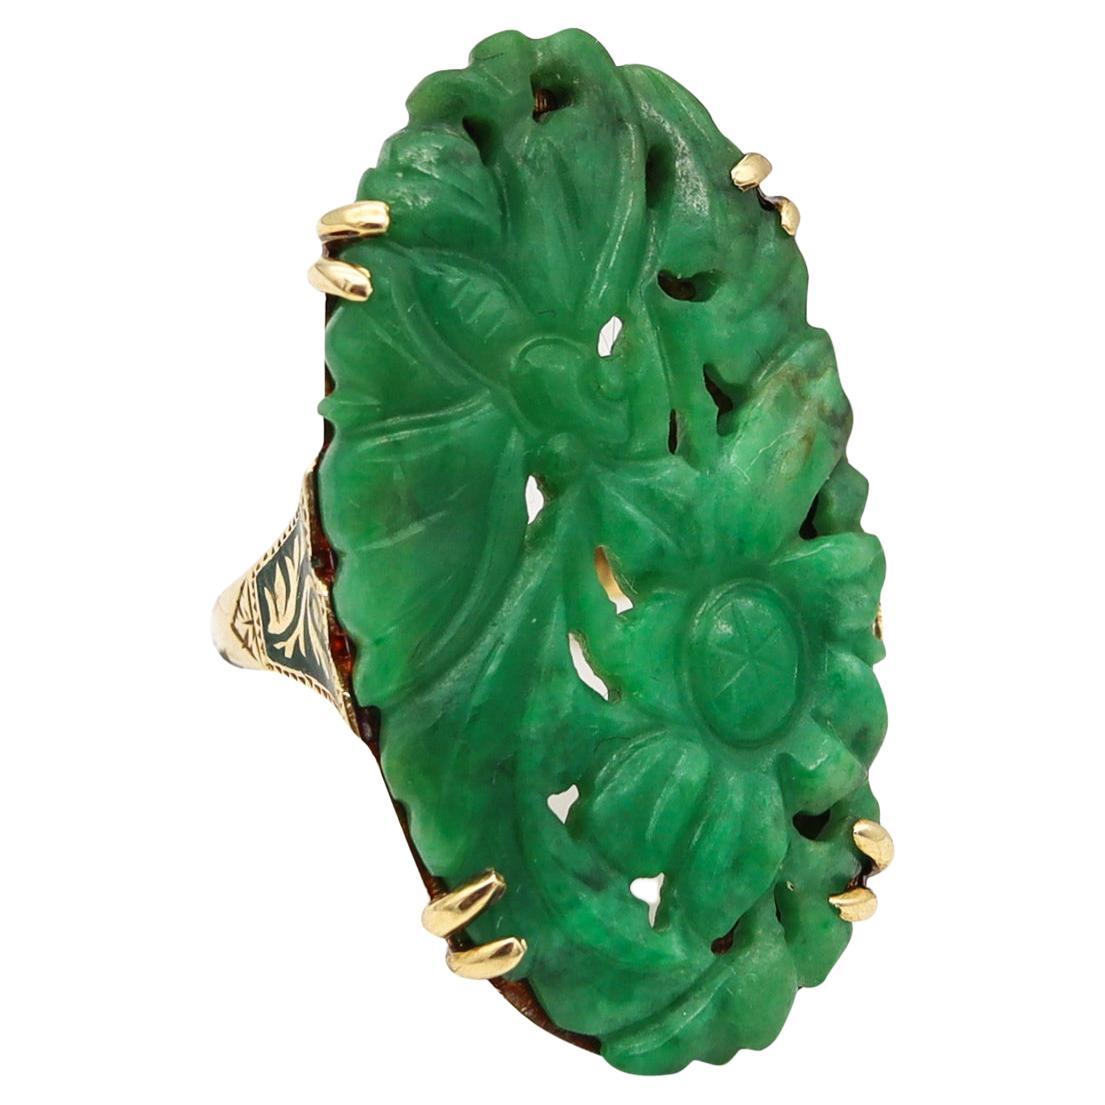 Art Deco 1925 Chinoiserie Enameled Oval Ring In 14Kt Gold With Carved Jadeite